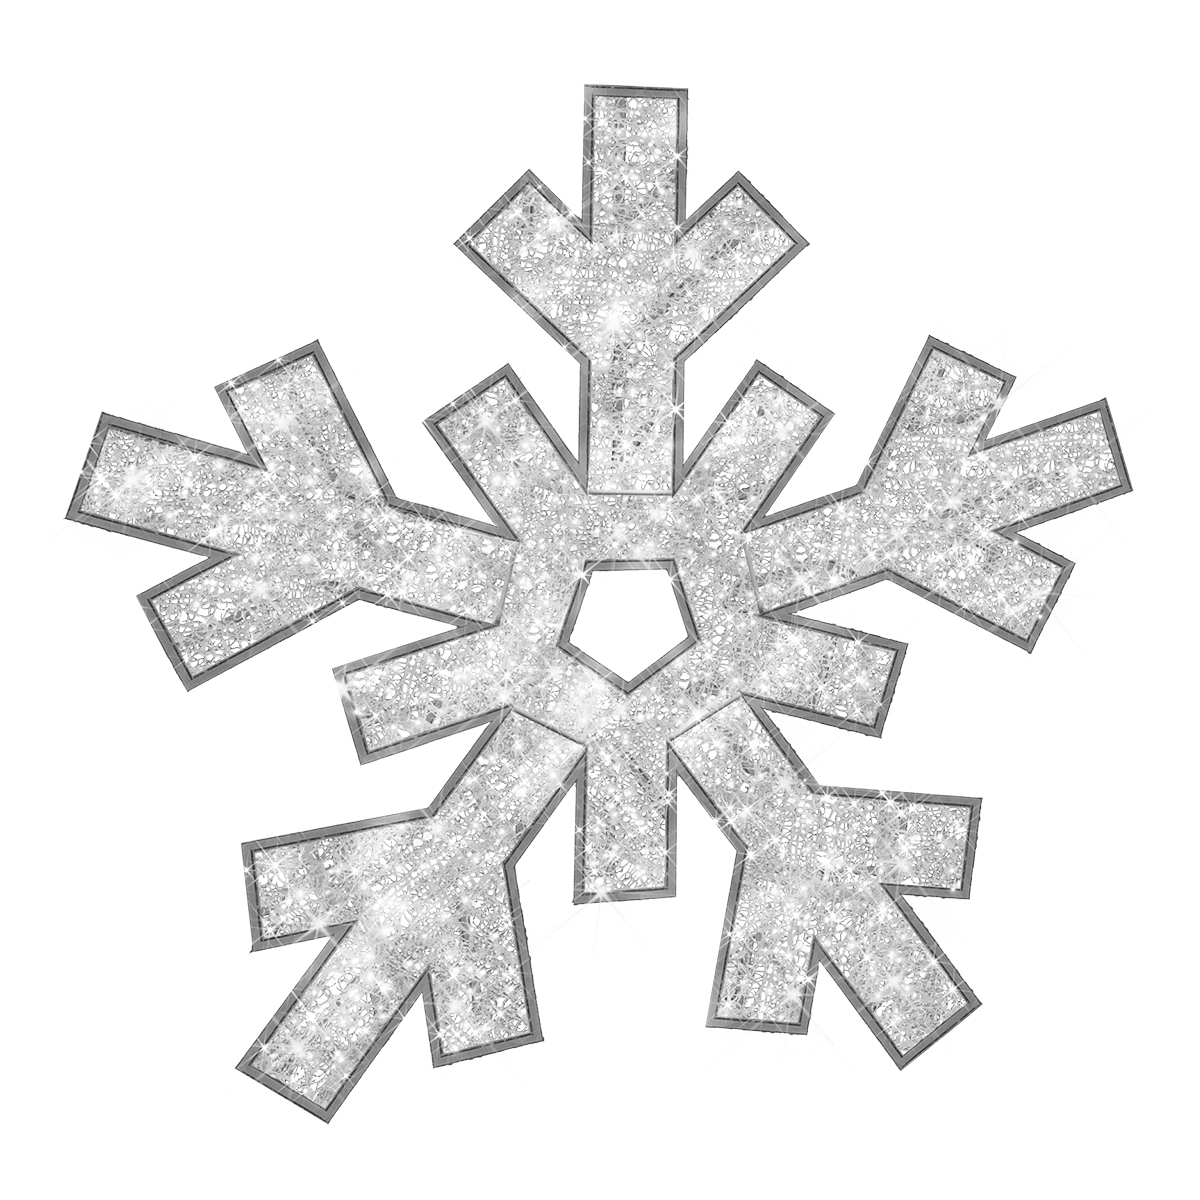 2D Snowflake - Christmas Display - Cool White - Silver - Large - 9.8ft tall